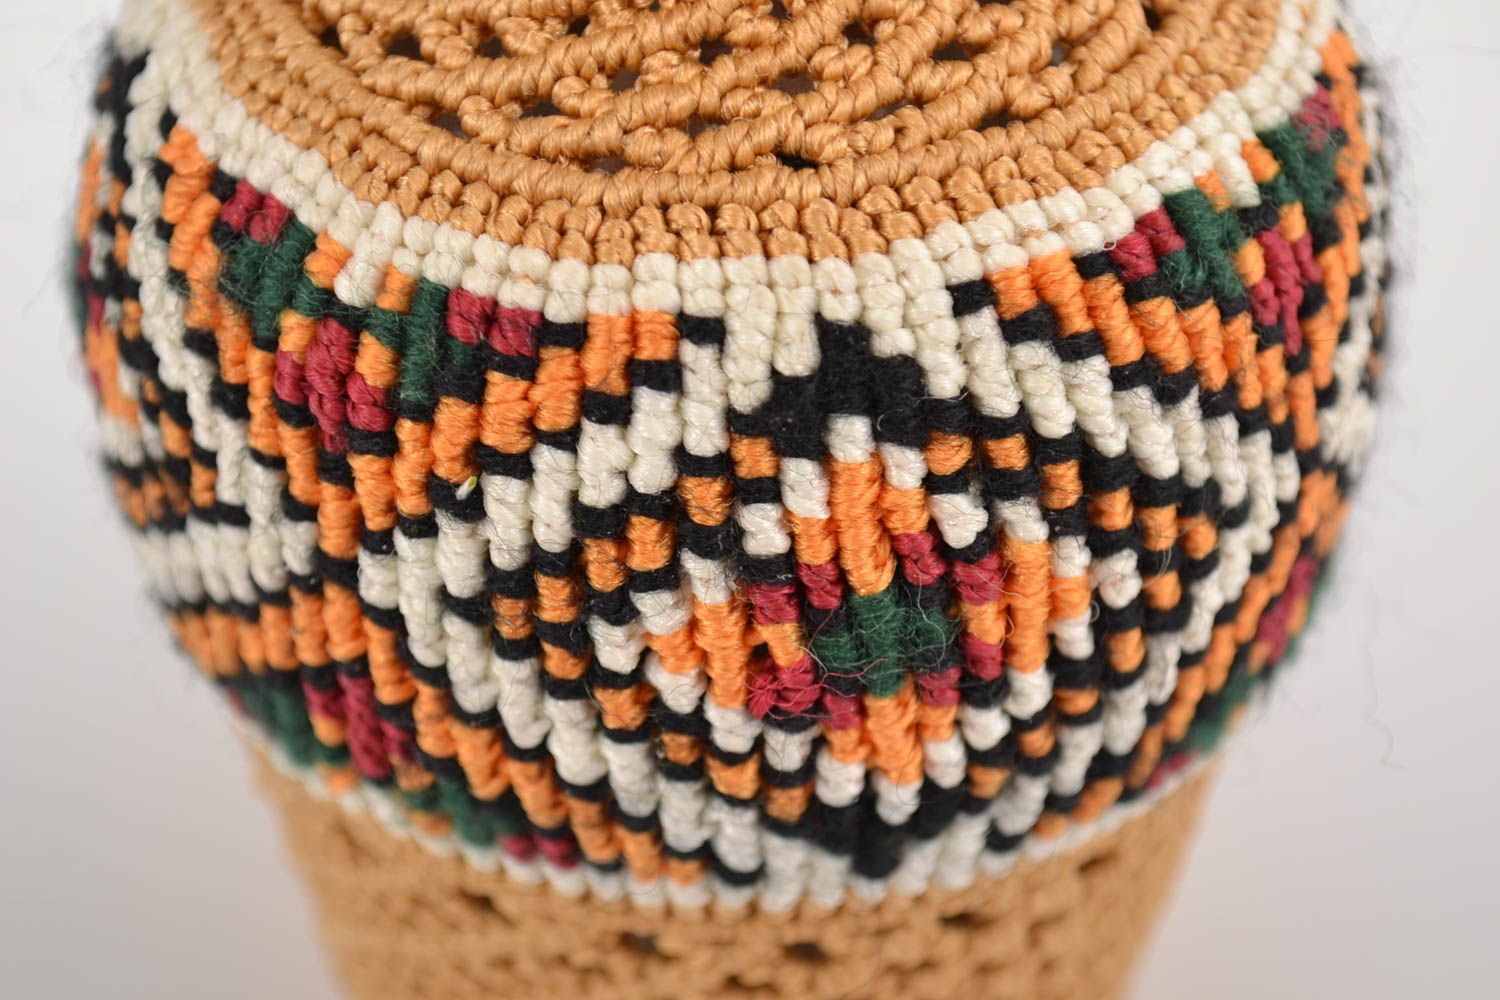 Handmade decorative glass bottle woven over with threads using macrame technique photo 2